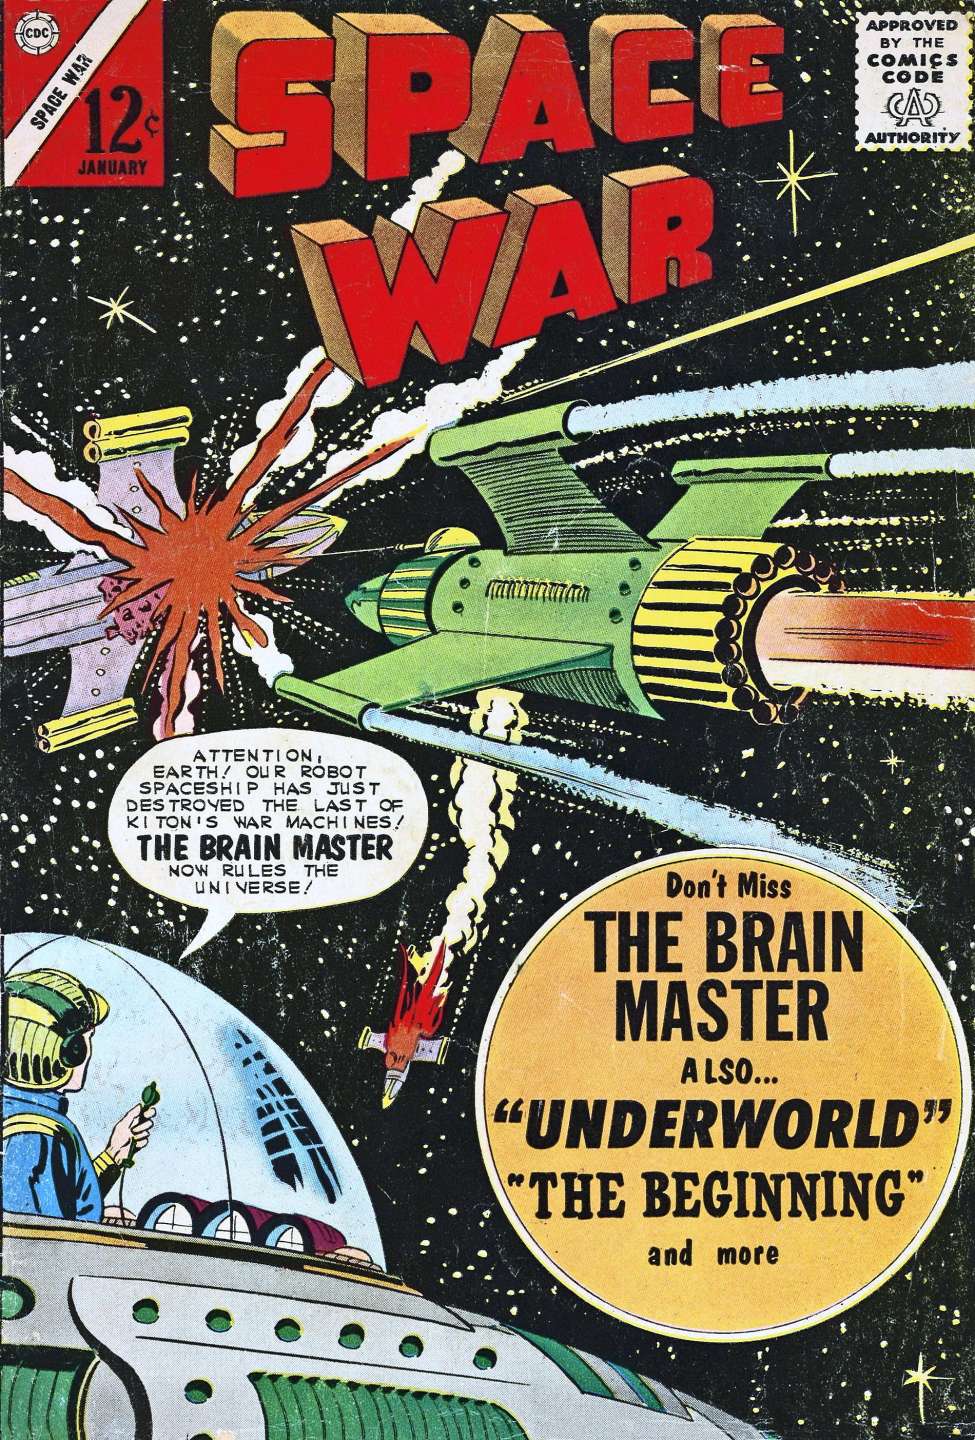 Book Cover For Space War 20 - Version 2